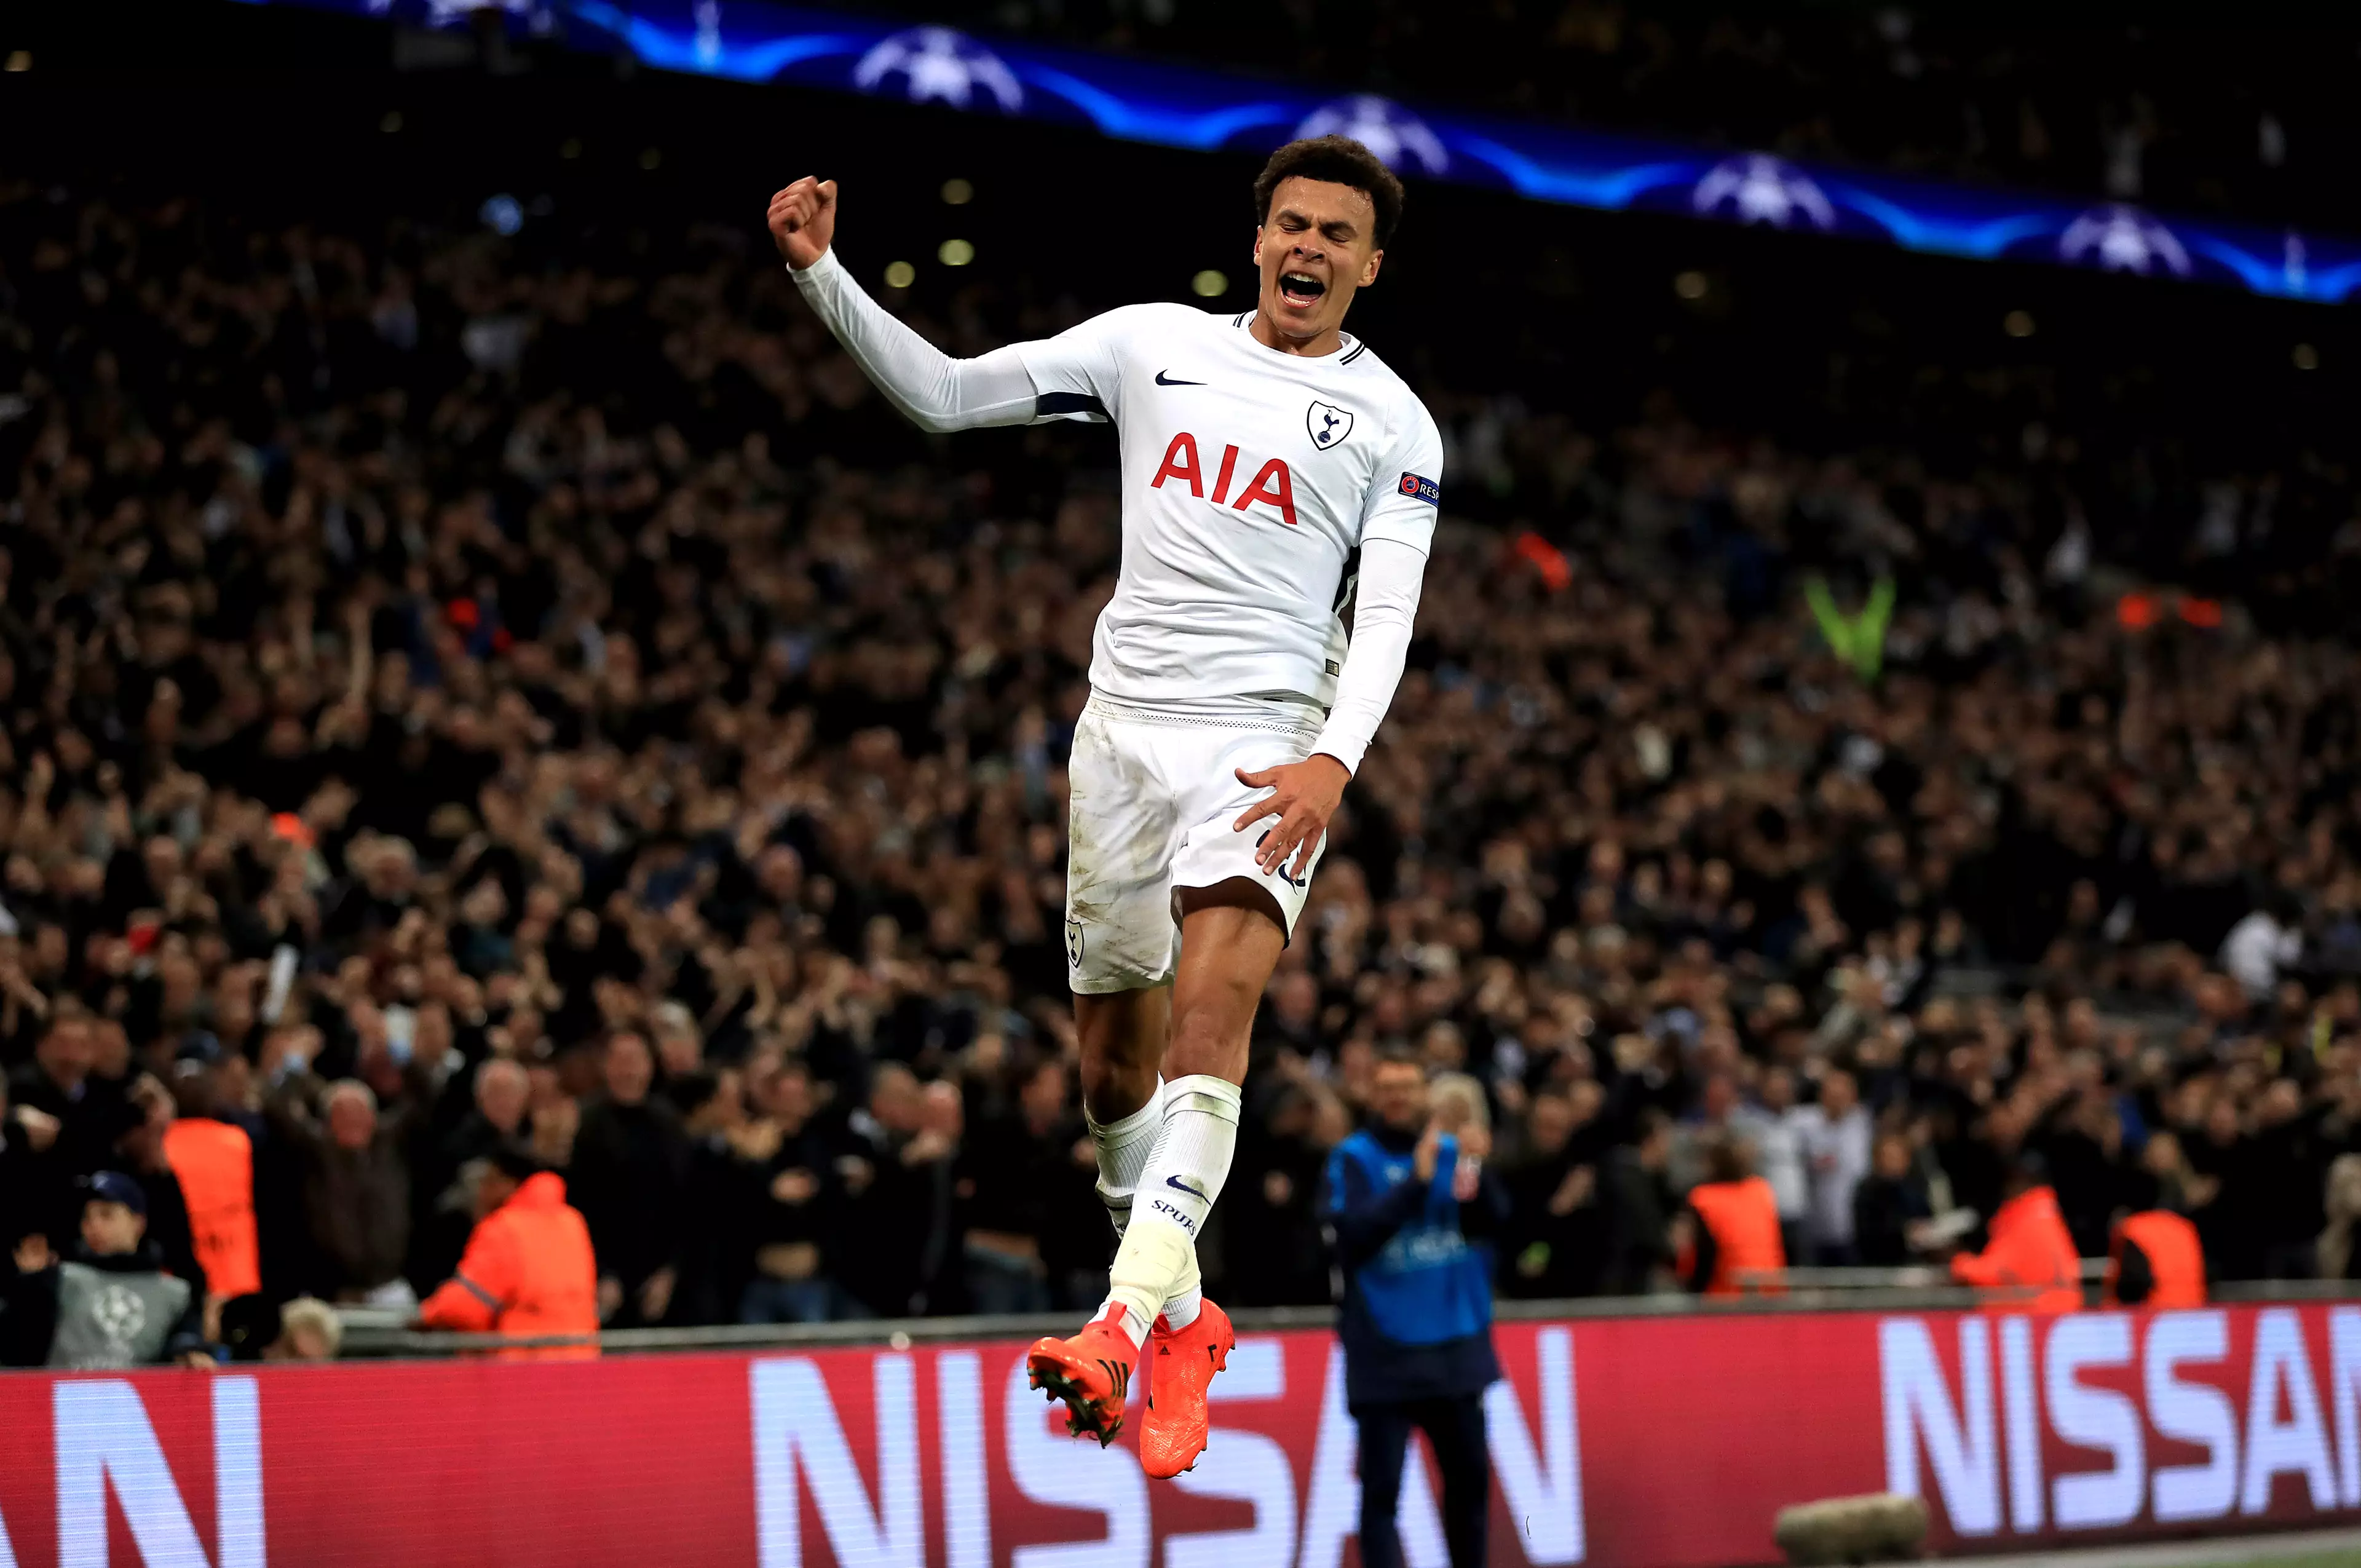 Alli grabbed a pair against Real last season in a 3-1 win. Image: PA Images